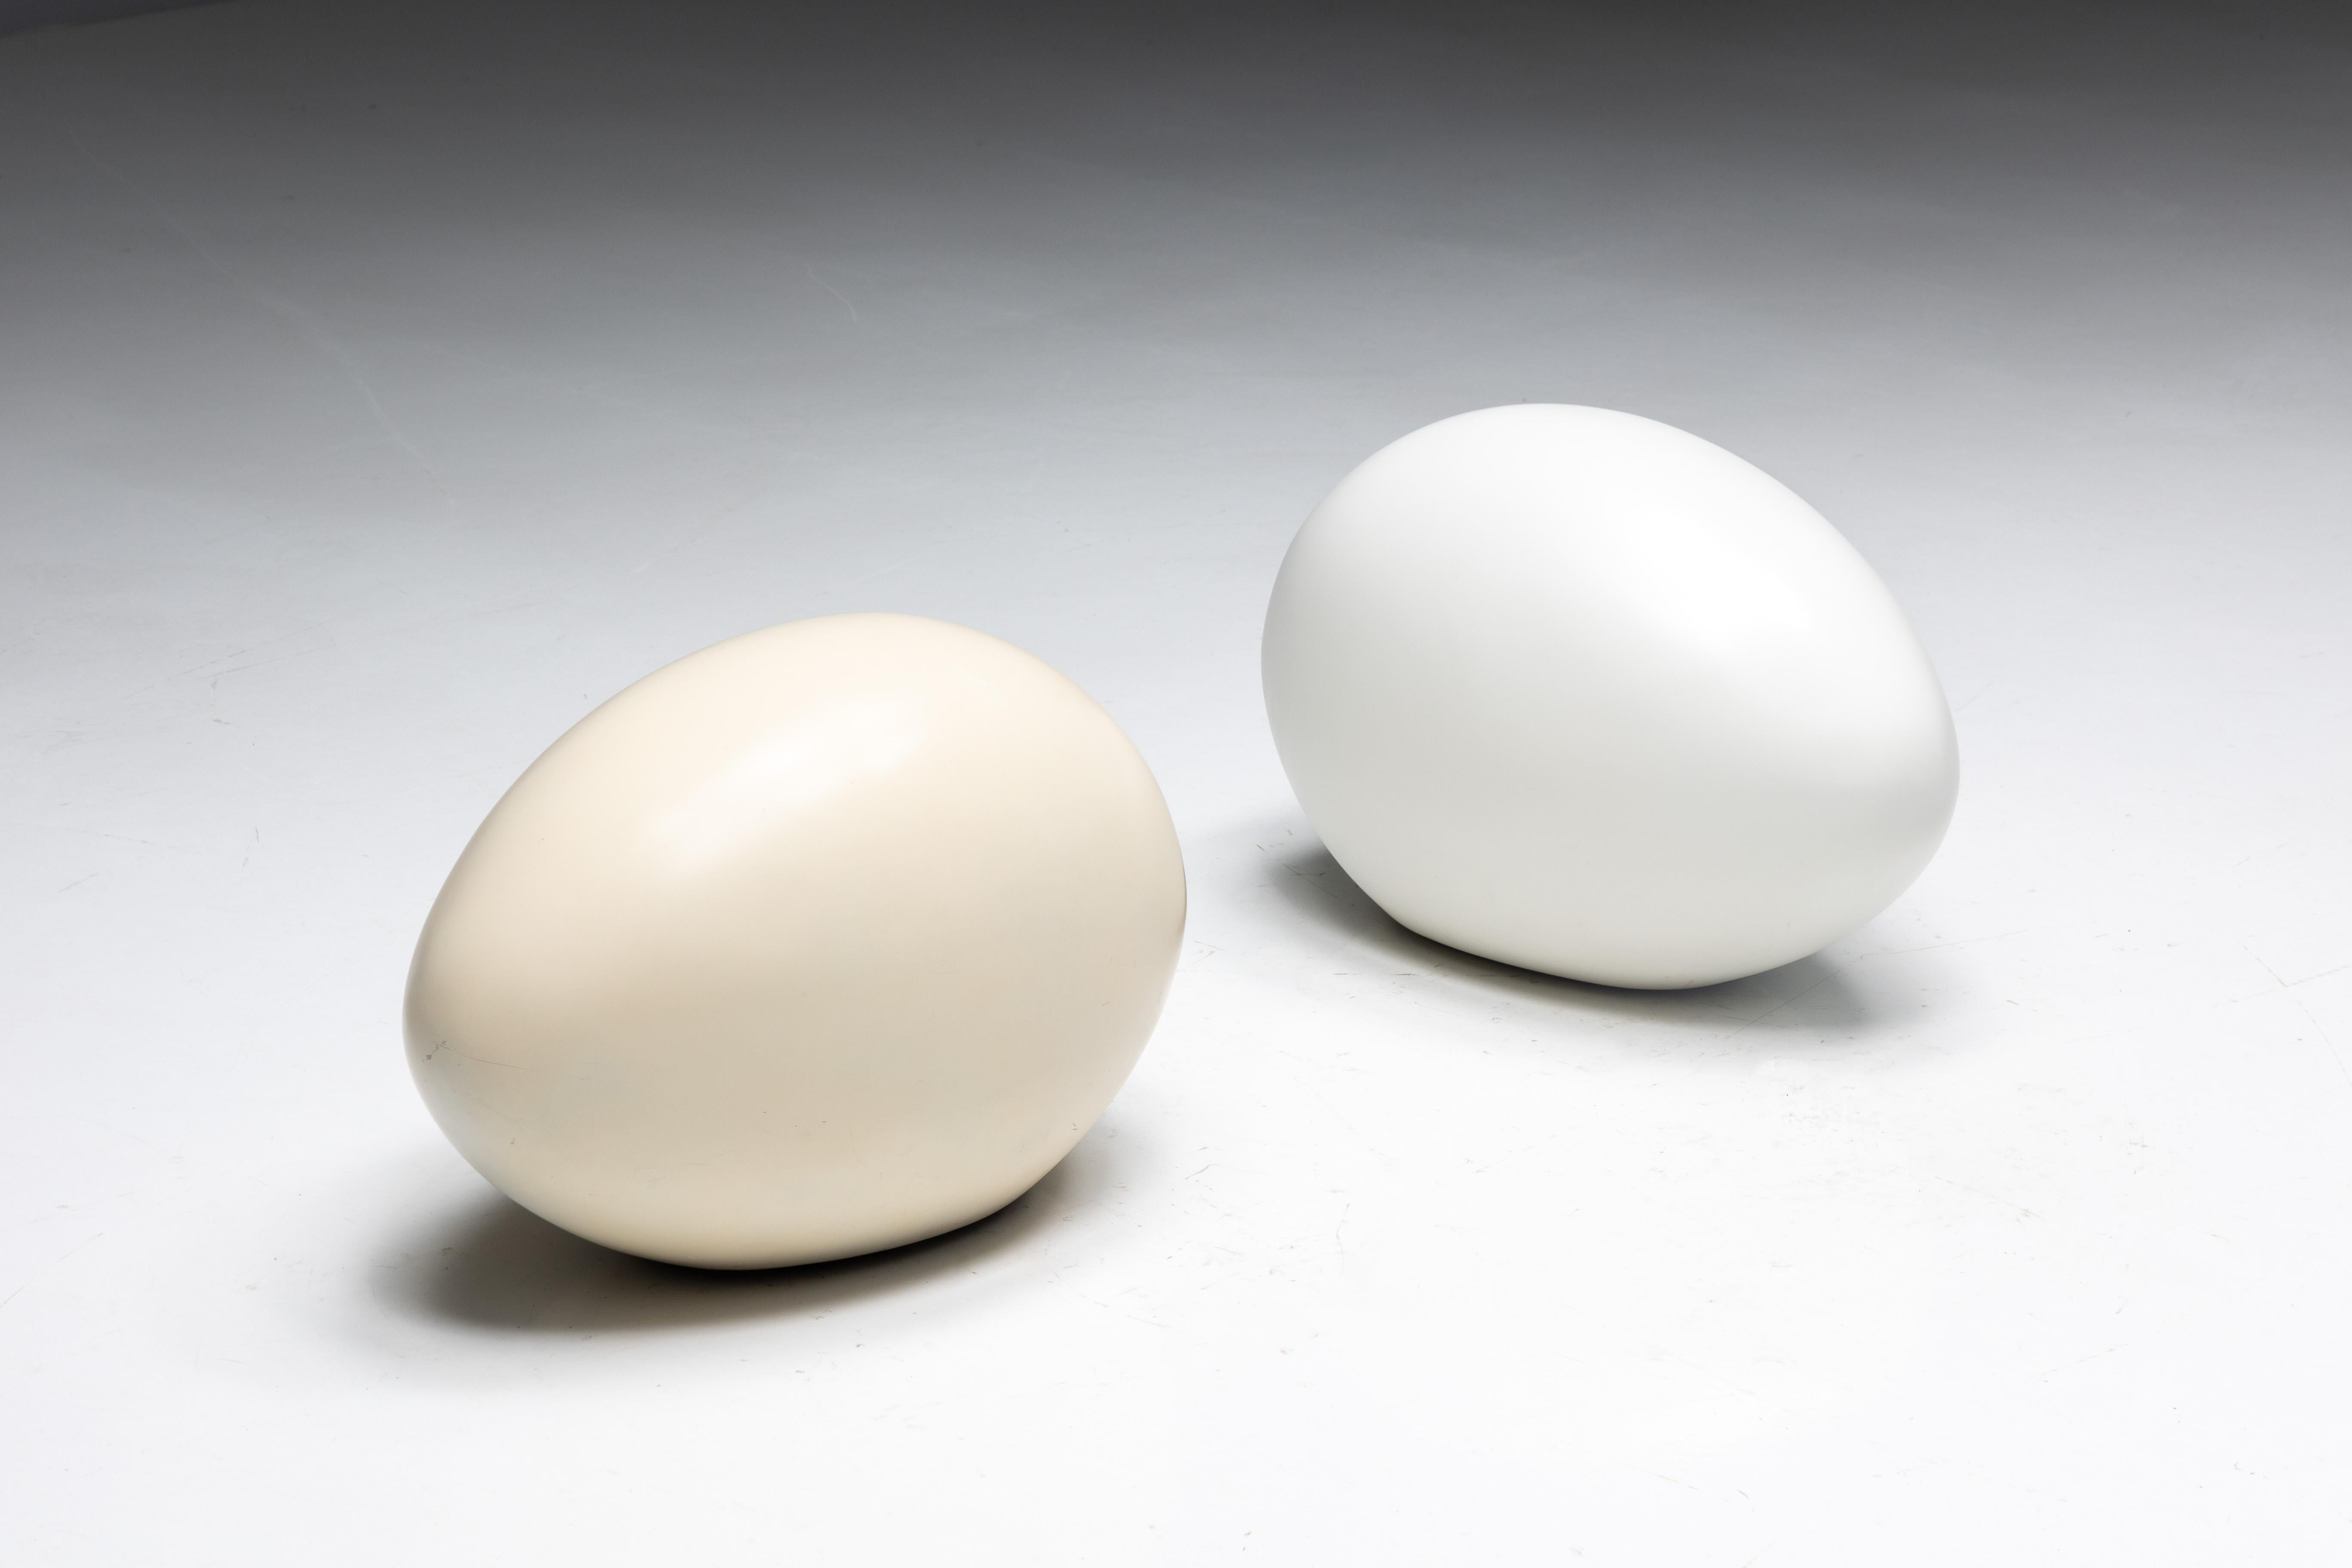 Egg-shaped footstools designed by Philippe Starck and exclusively crafted for Sanderson, London. Crafted from durable fiberglass, these footstools embody the hotel's ethos of pushing the boundaries of conventional design. Just as Sanderson